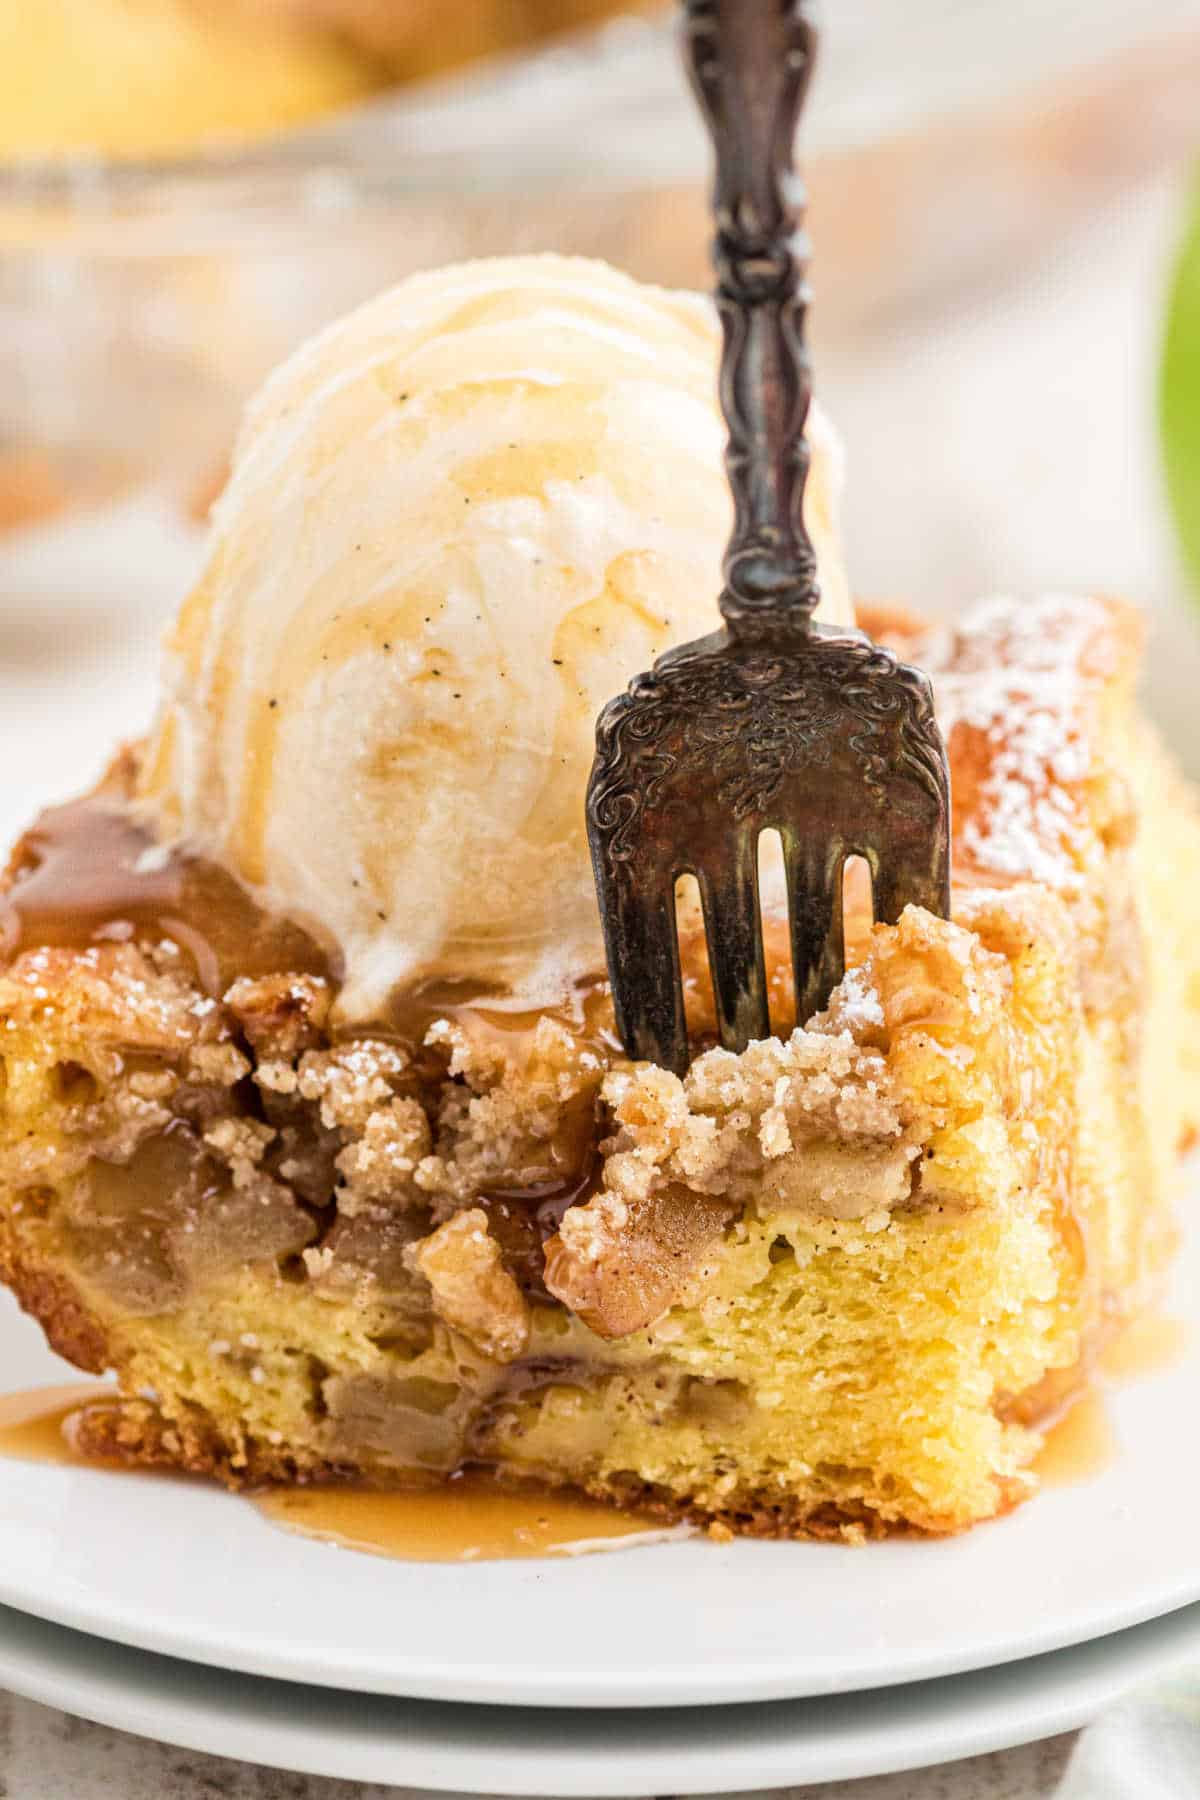 Close up shot of a piece of apple pie cake with a fork digging into it.